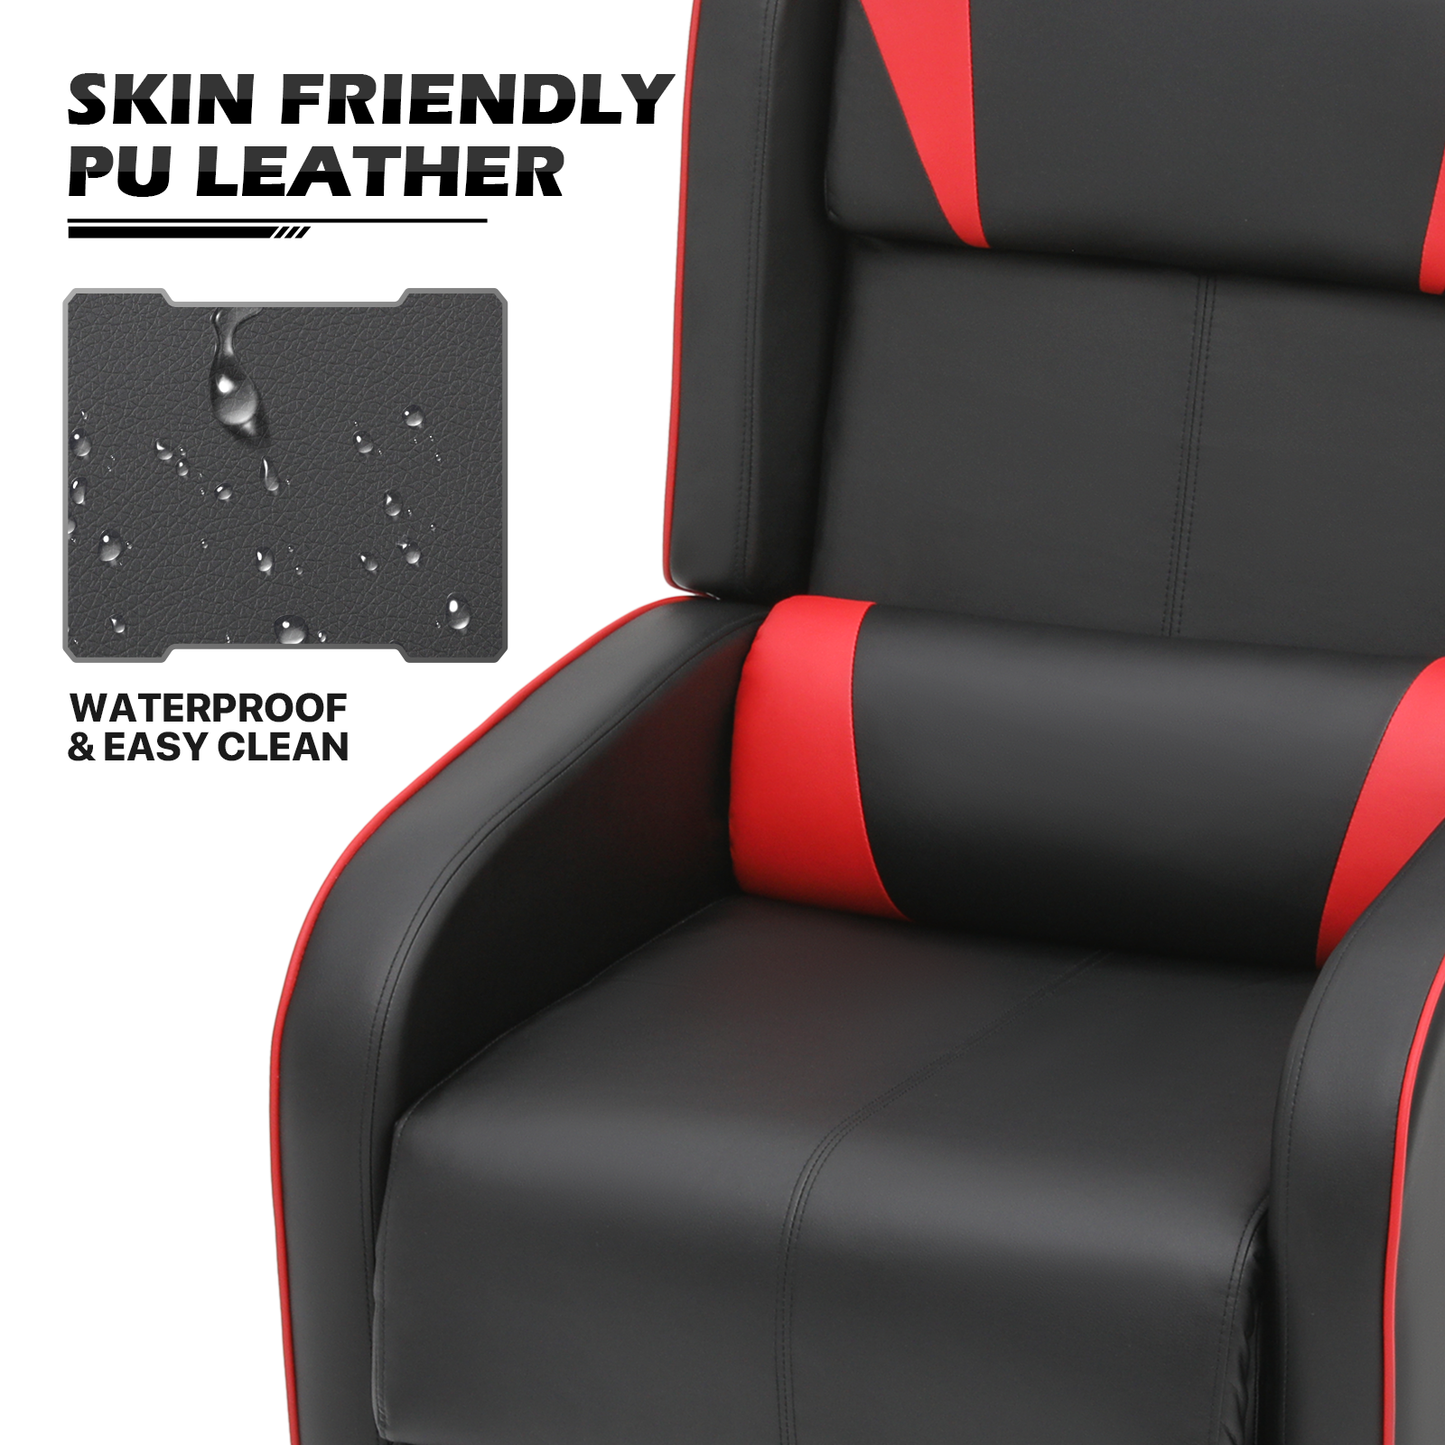 Single Sofa - Reclinable Gaming Chair - PU Leather Seat